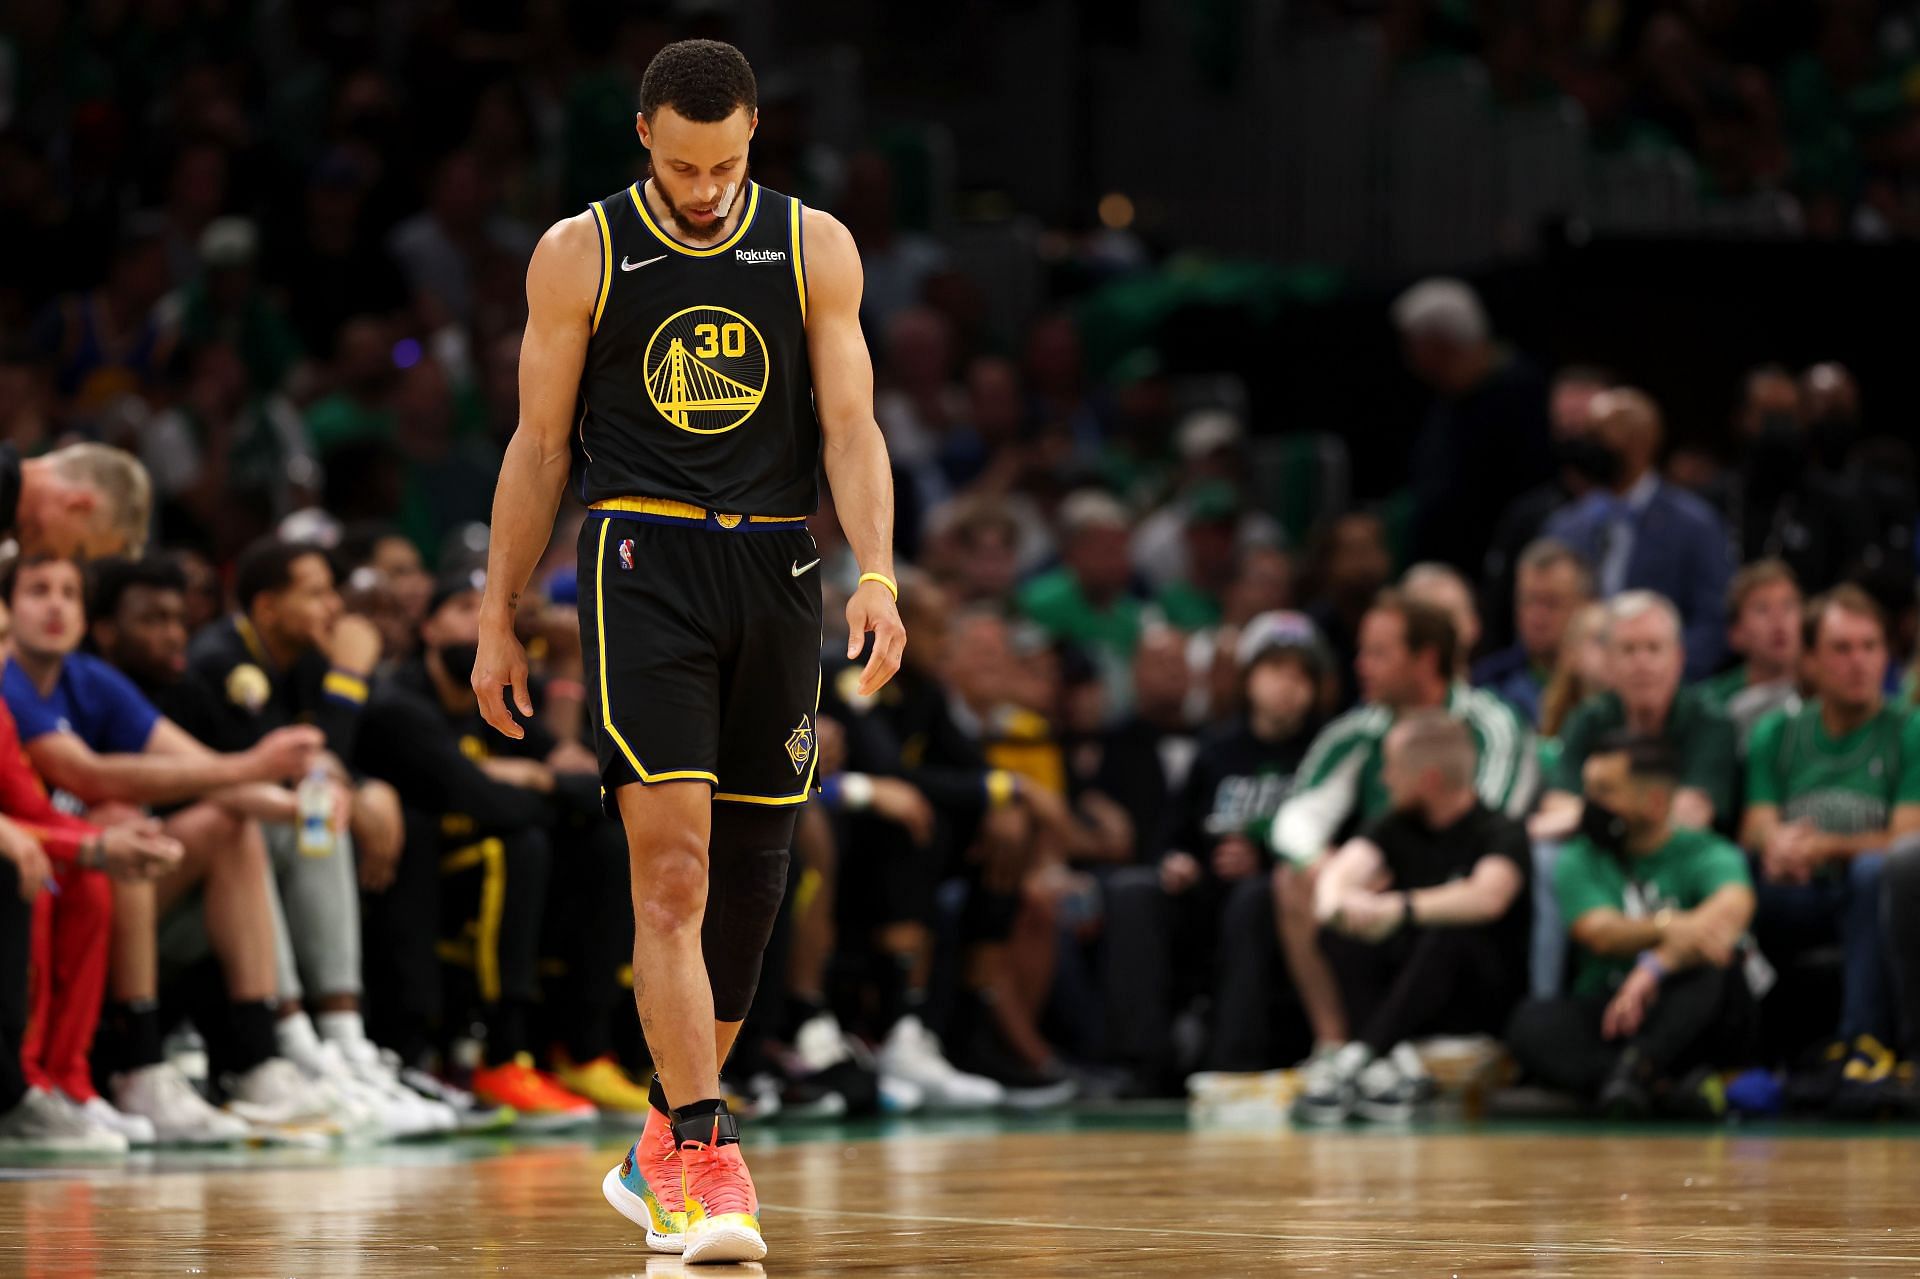 Steph Curry of the Golden State Warriors looks on in the second quarter against the Boston Celtics.